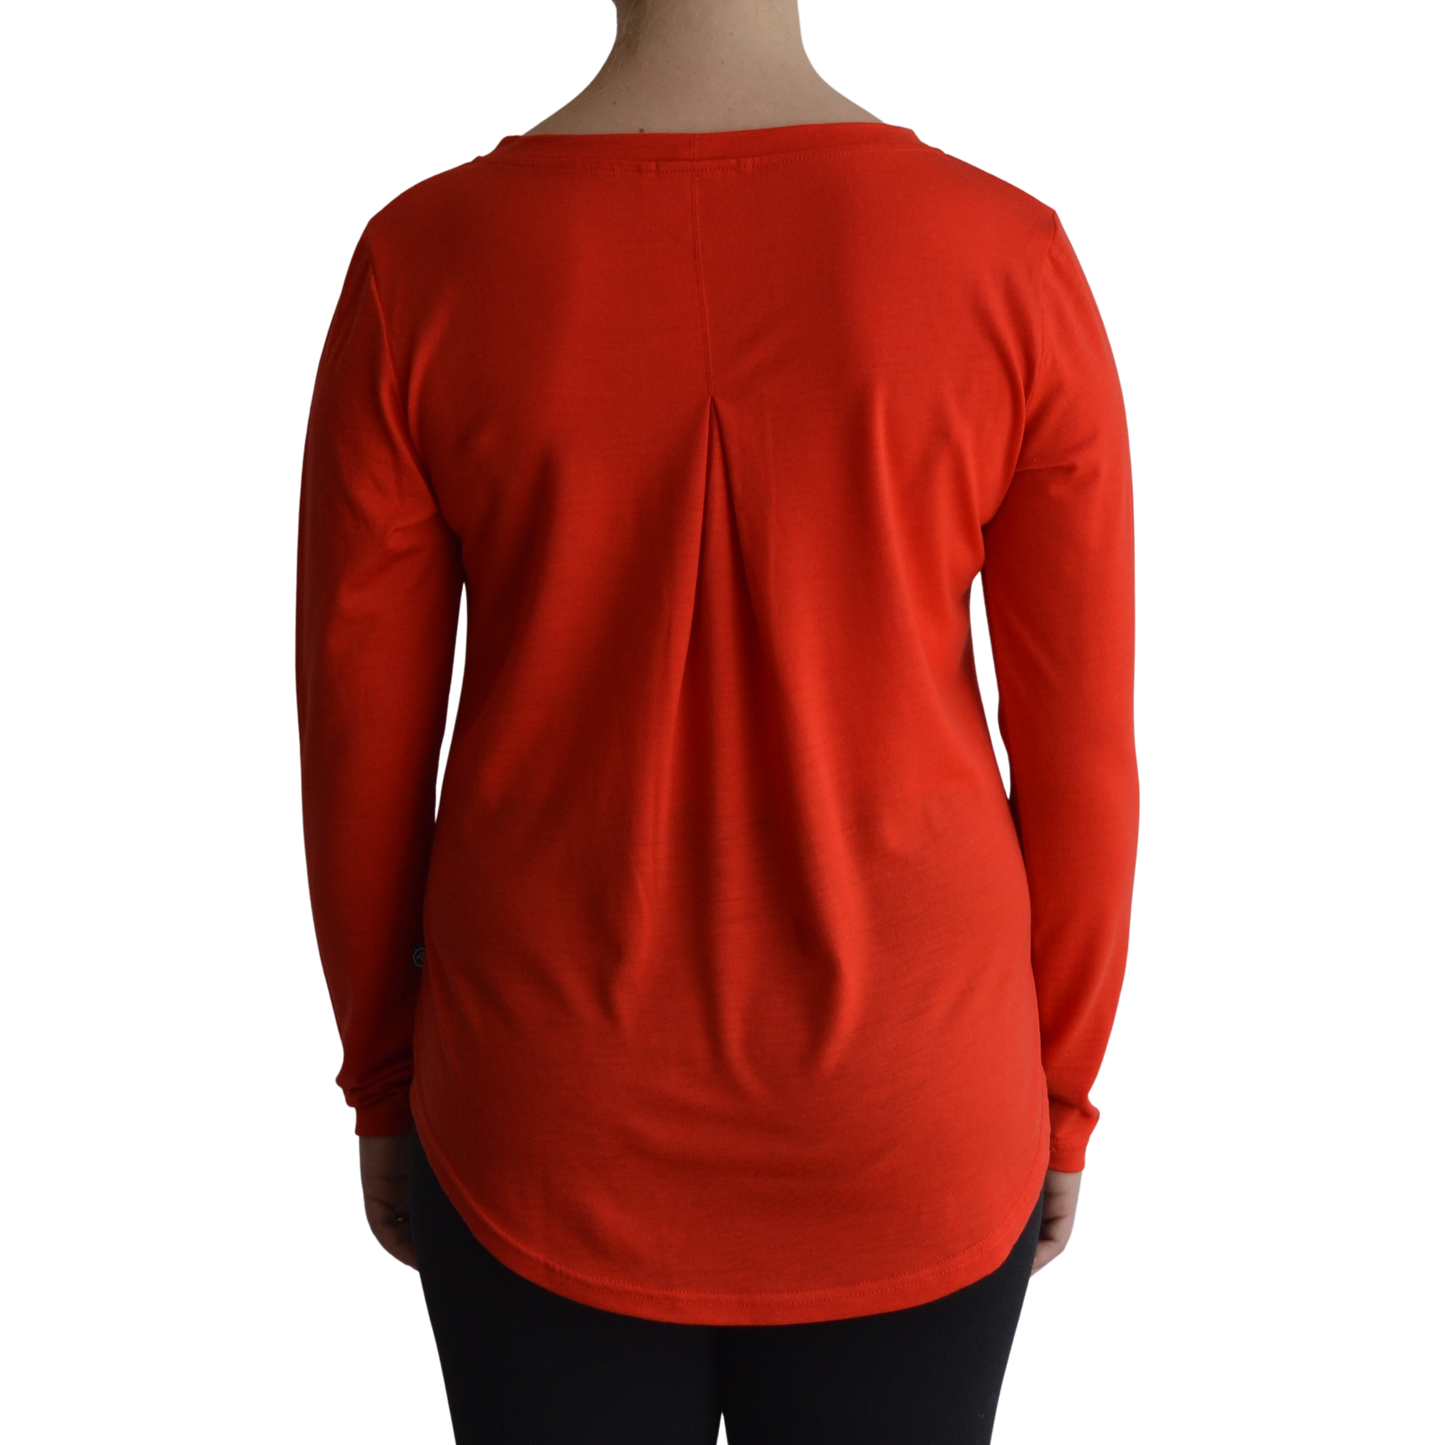 Links long sleeve merino top in mandarin colour, model faces away so the back is showing front on with a box pleat and scooped hemline. 